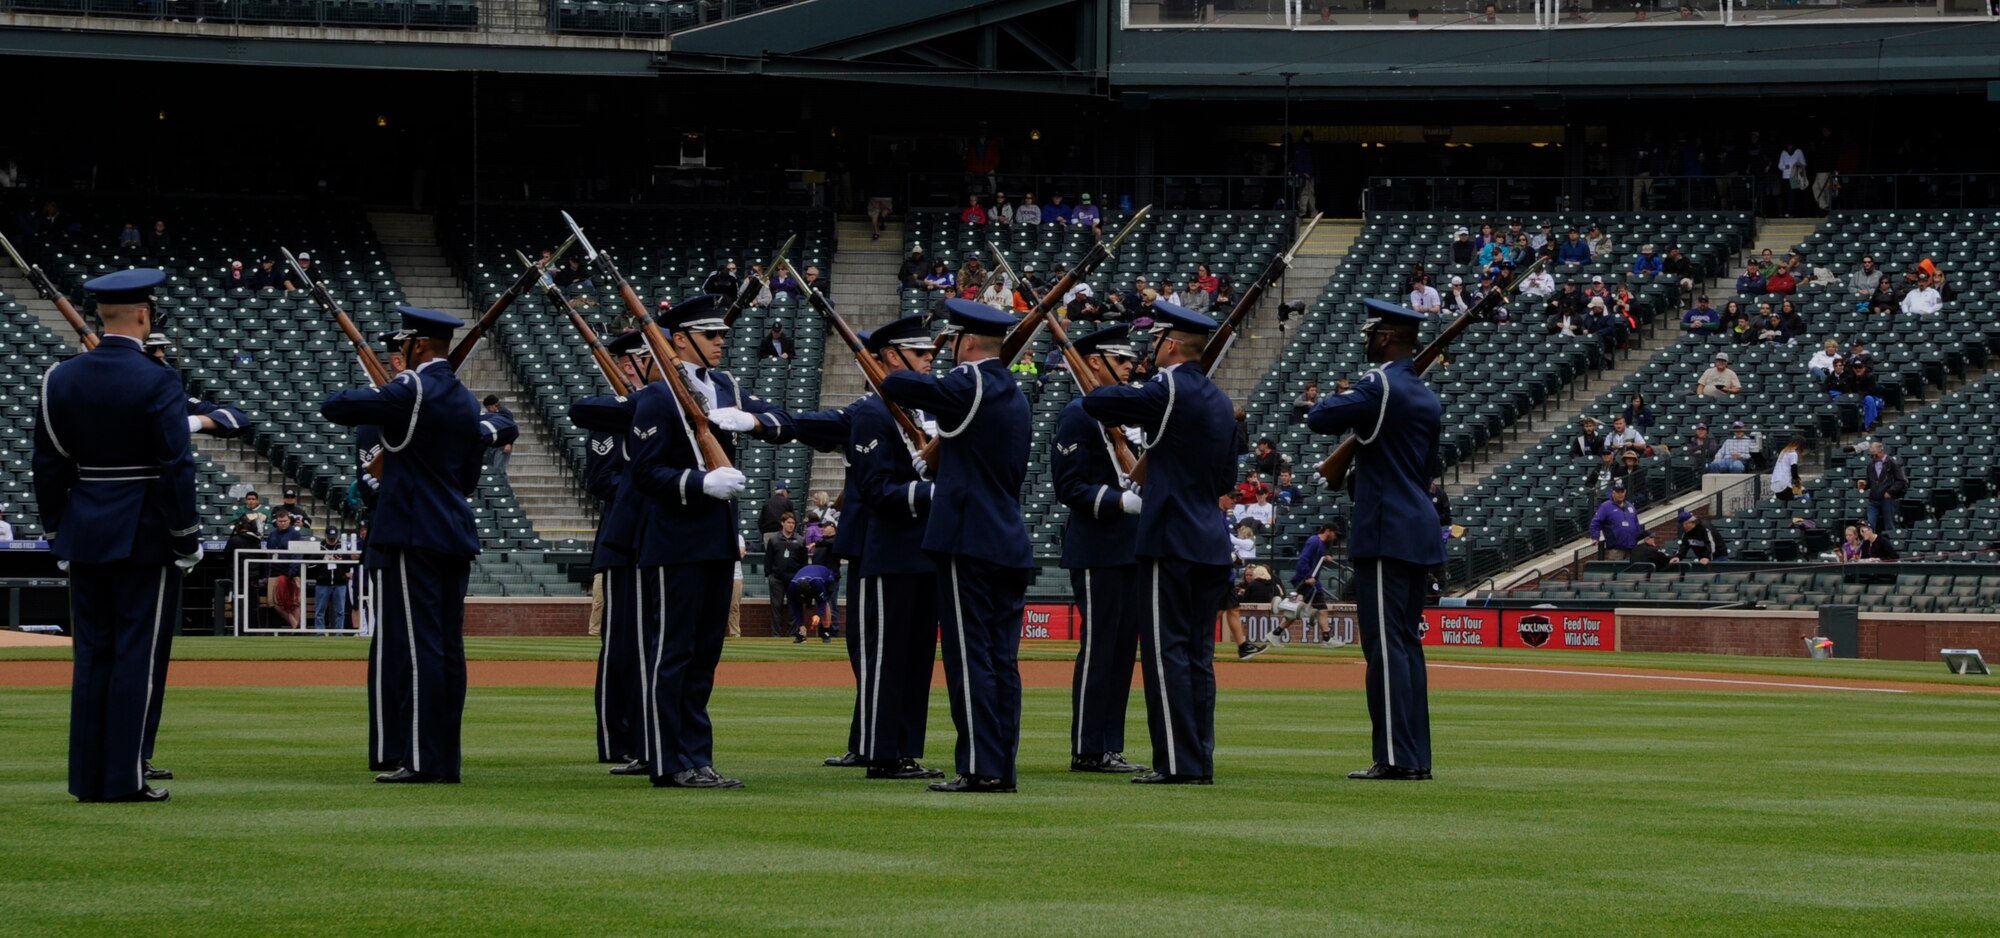 The United Stated Air Force Honor Guard Drill Team performs at a Colorado Rockies game against the San Francisco Giants at Coors Field in Denver, Colo., May 24, 2015. The Drill Team promotes the Air Force mission by showcasing drill performances at public and military venues to recruit, retain and inspire Airmen. (U.S. Air Force photo by Senior Airman Preston Webb/RELEASED)